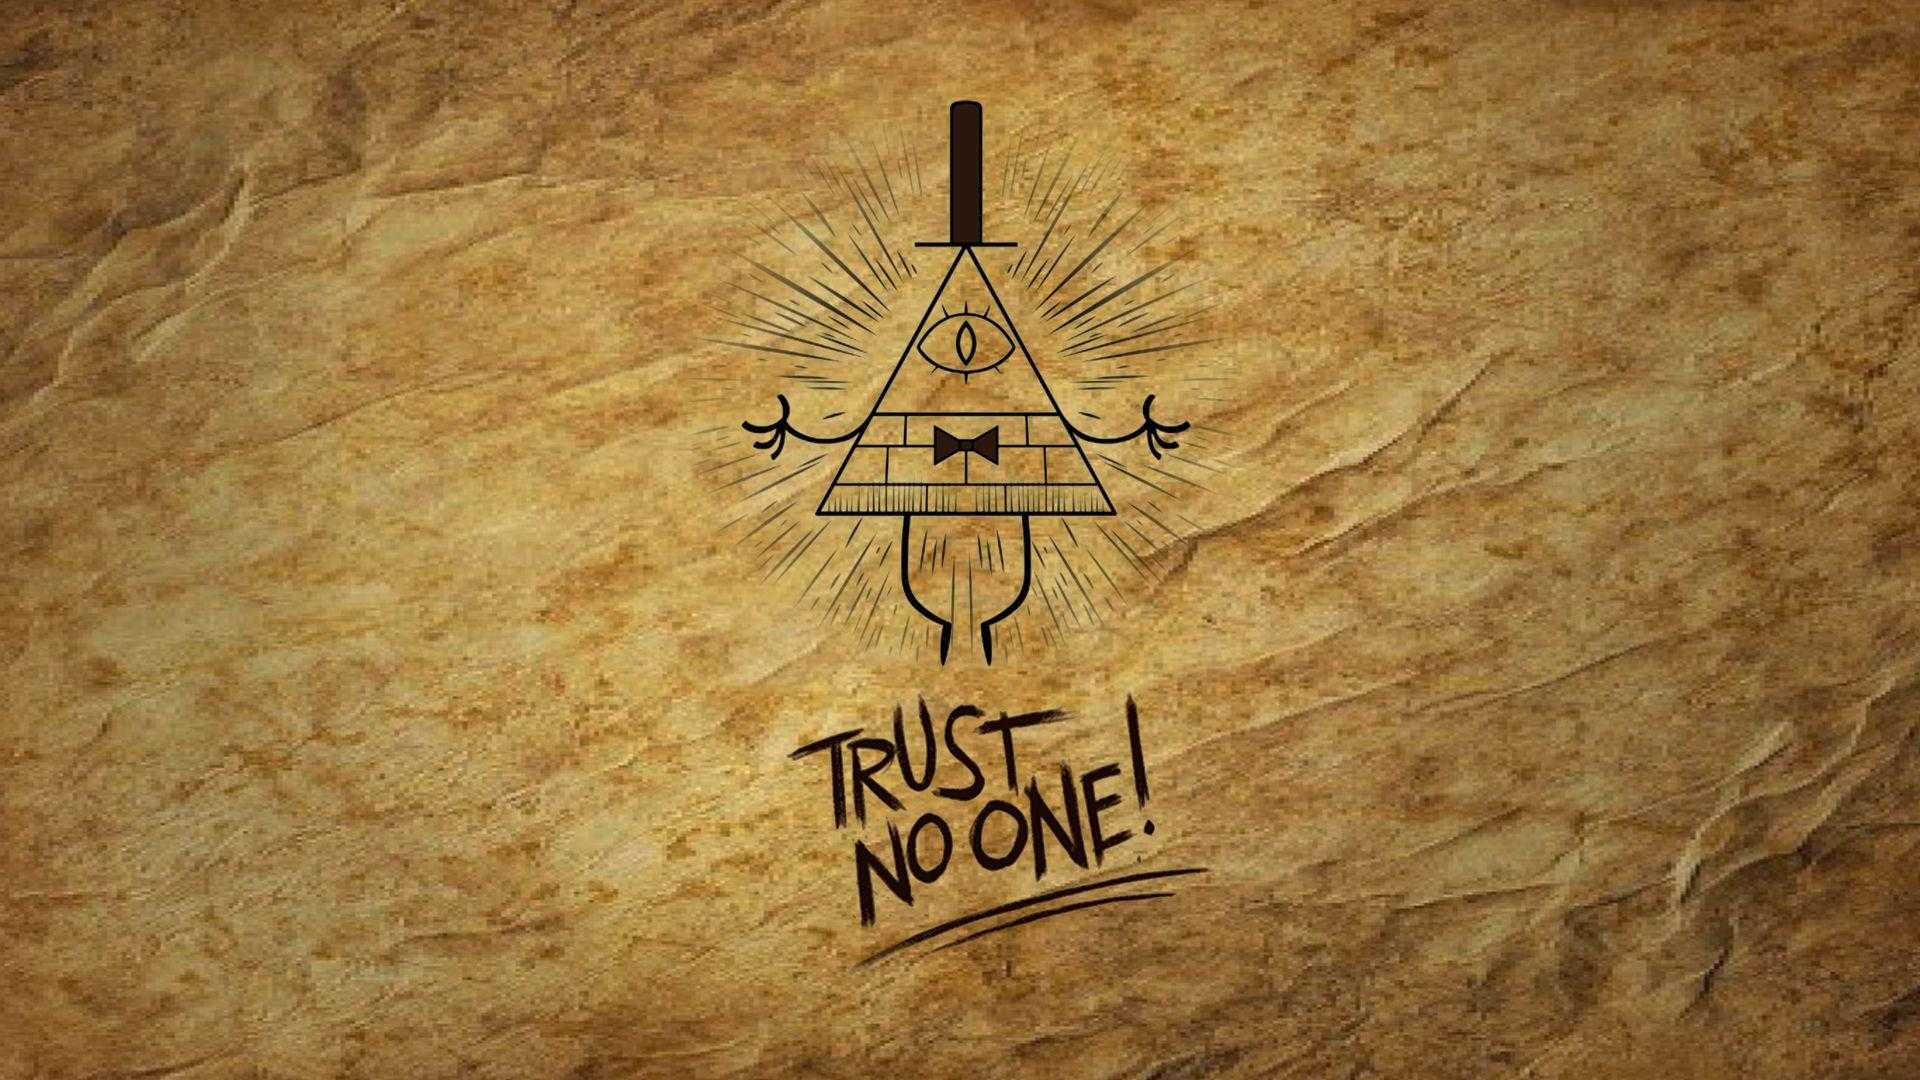 Gravity Falls Wallpaper HD Image High Resolution Of Androids